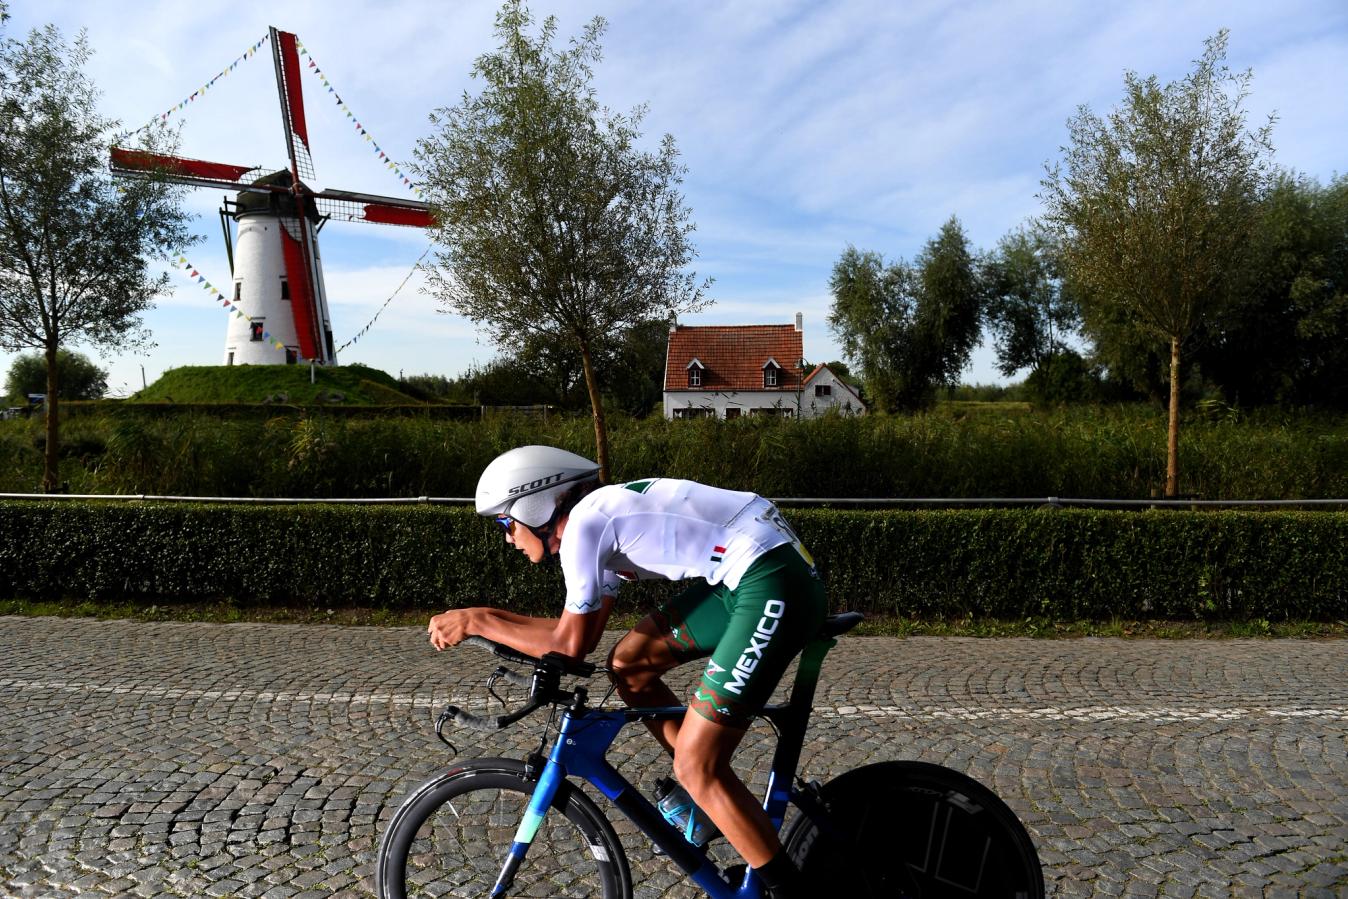 Isaac Del Toro racing the junior time trial at the 2021 World Championships